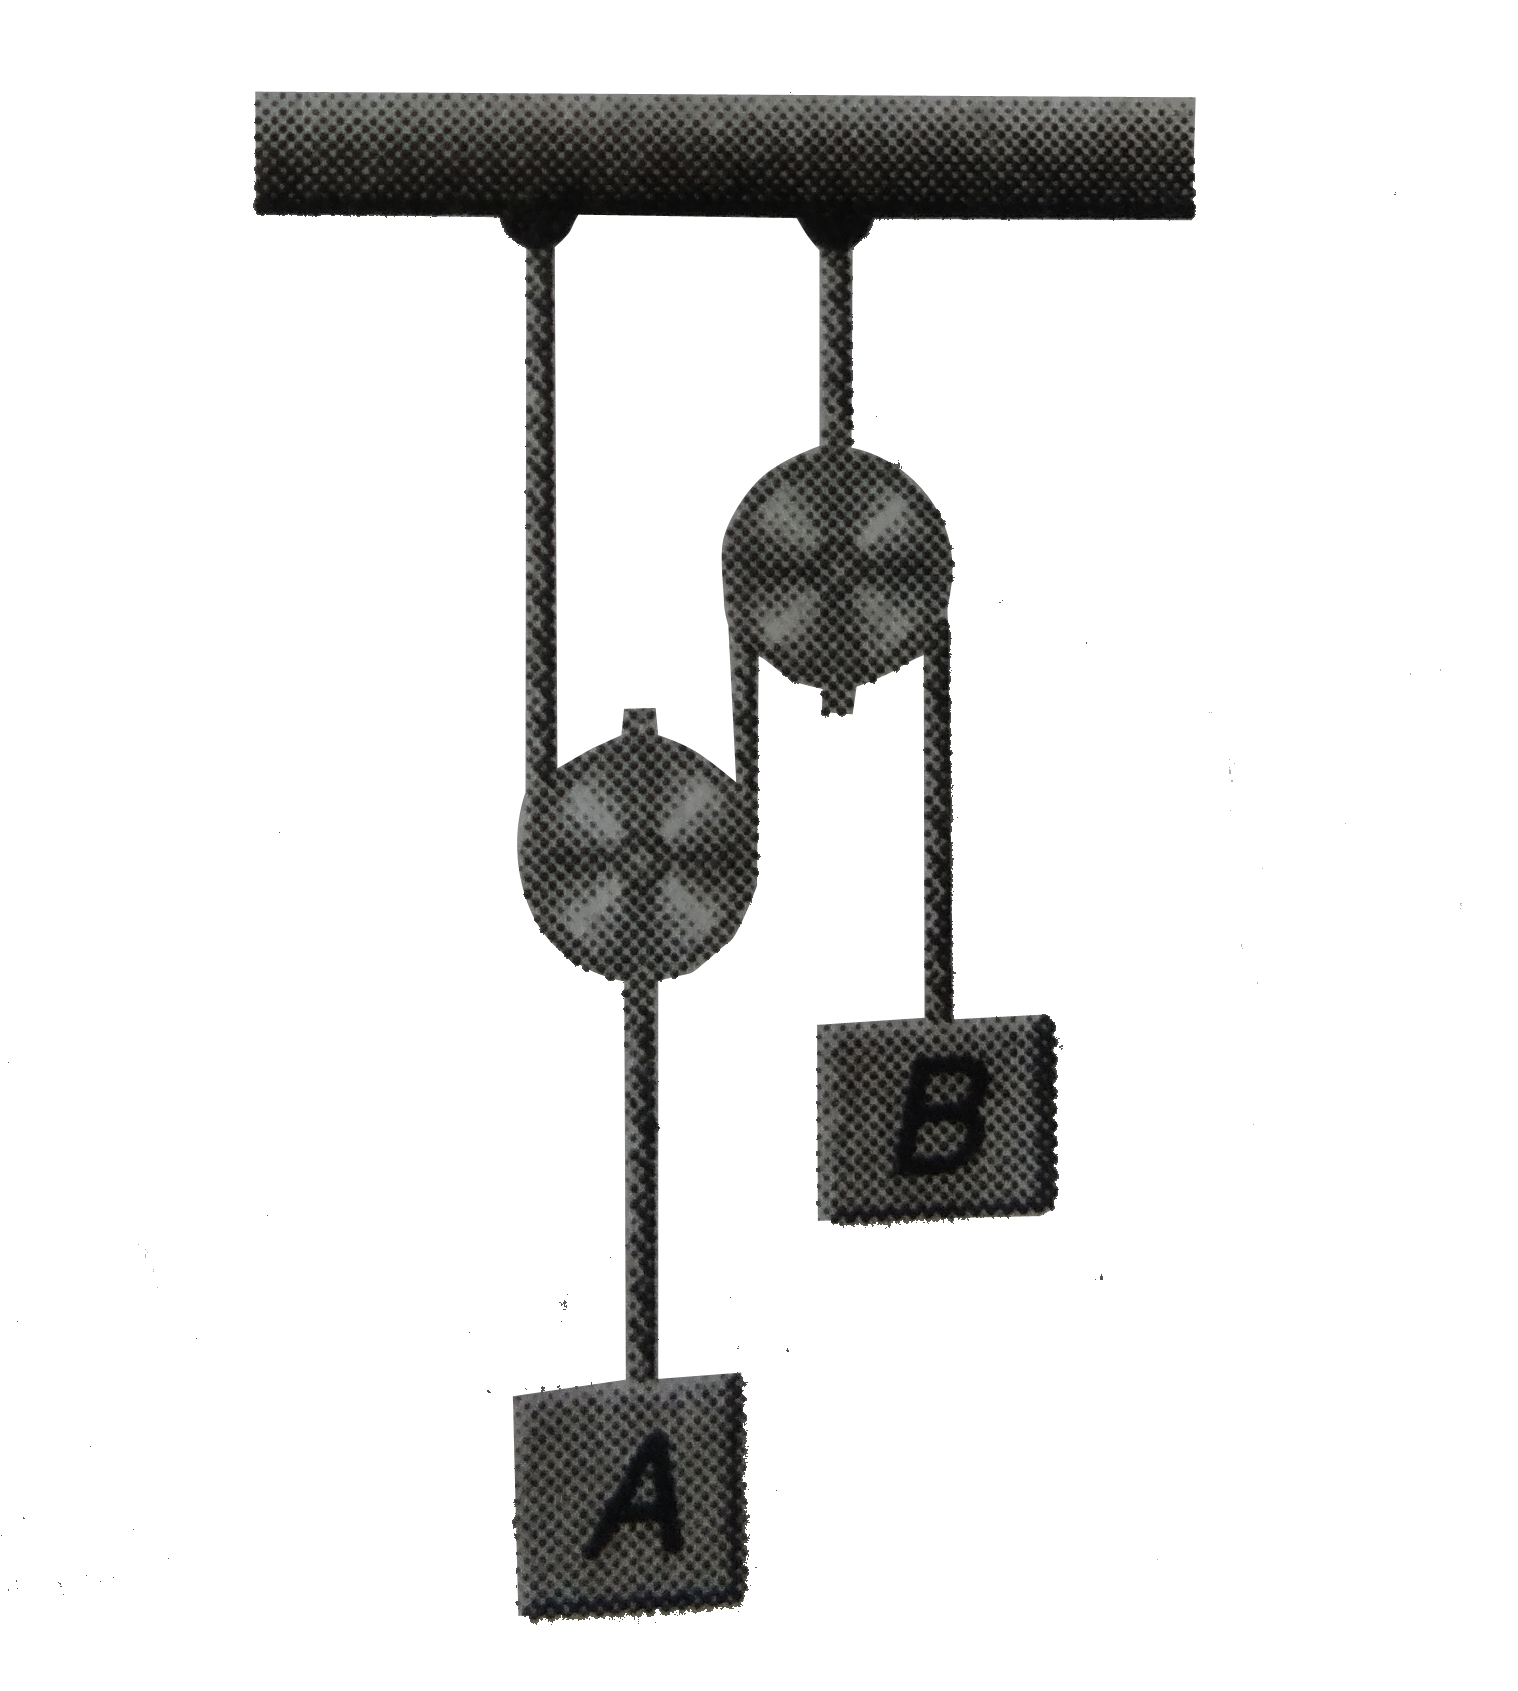 Block A has a weight of 3000 N and block B has a weight of 500 N. Determine the distance that A must descend from rest before it obtains a speed of 2.5 m//s. Neglect the mass of the cord and pulleys.   .